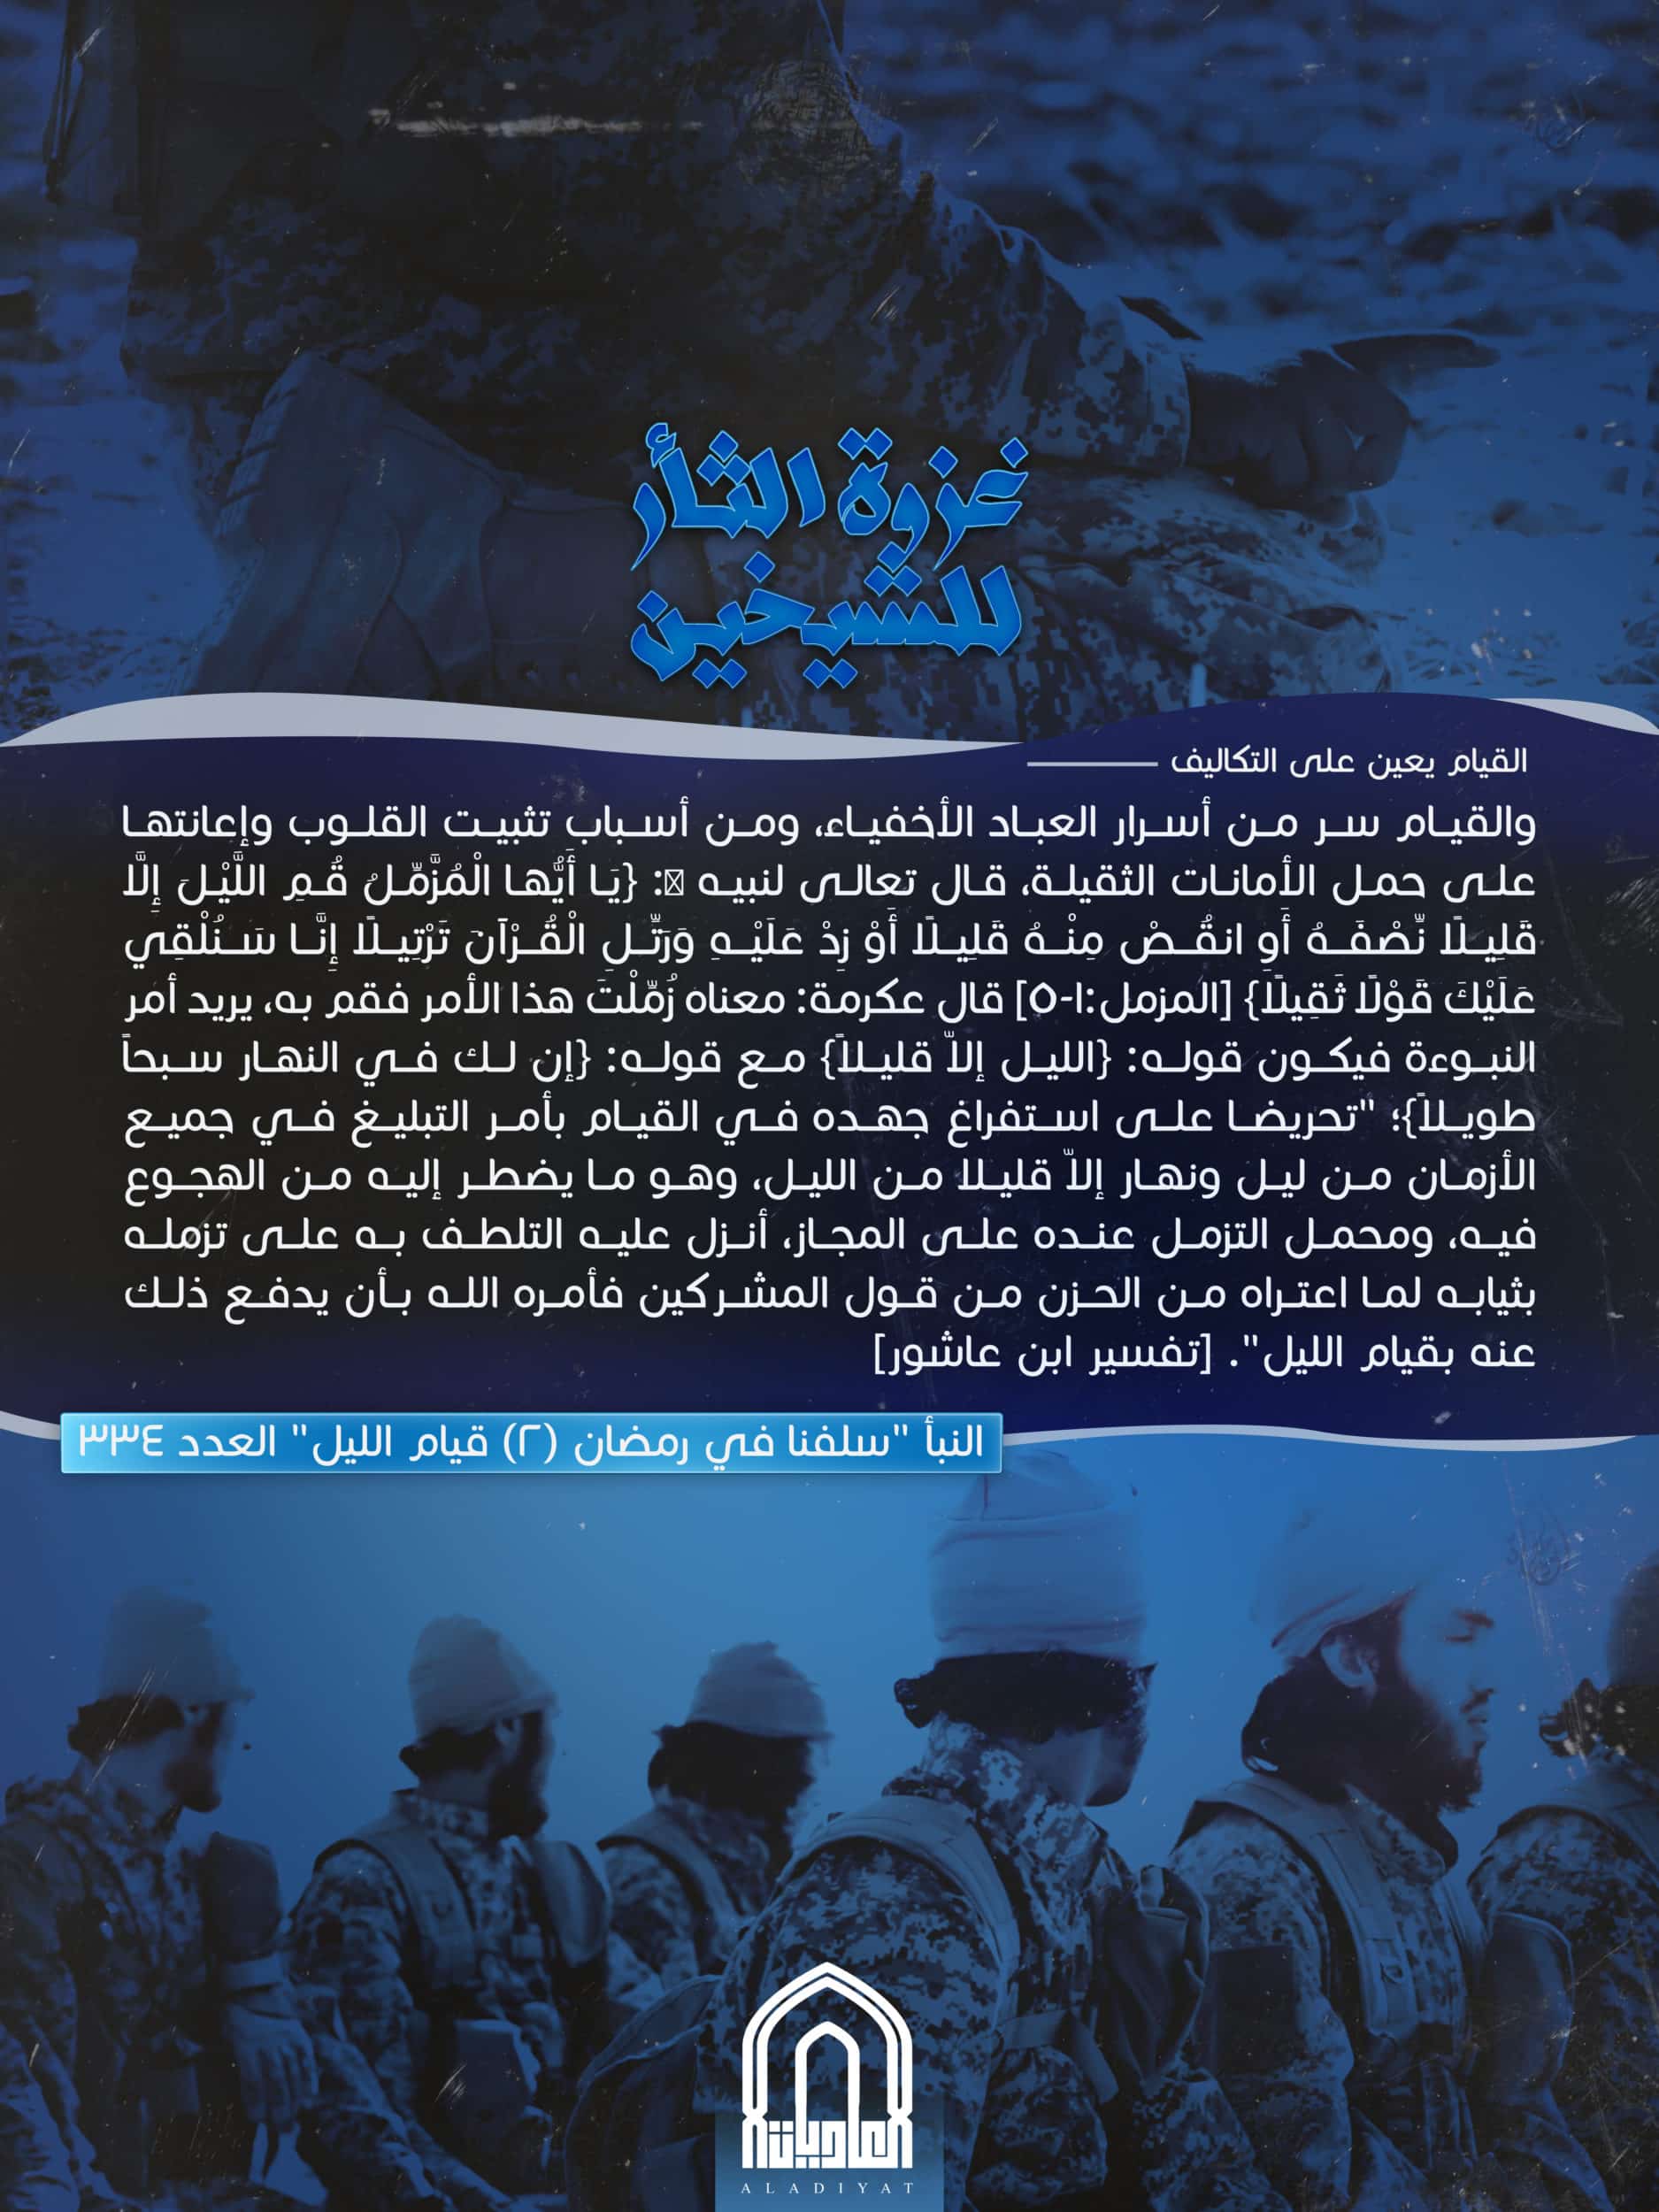 (Poster) al-Adiyat Media (Unofficial Islamic State): "The Battle of Revenge for the Two Sheikhs" - 21 April 2022